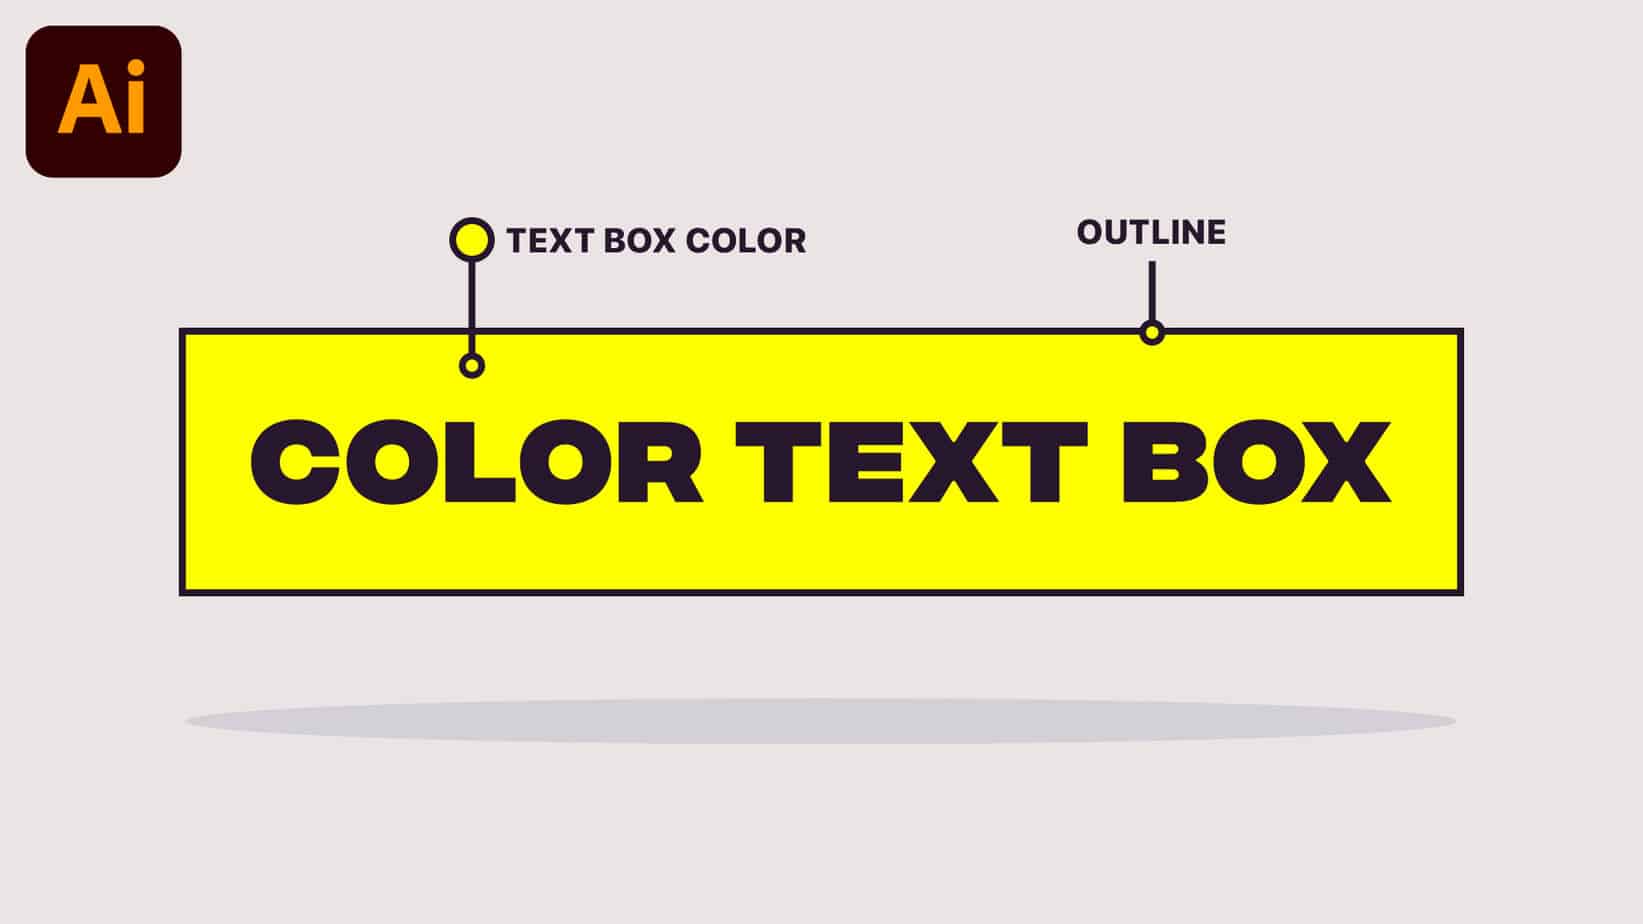 How to Add a Color Text Box